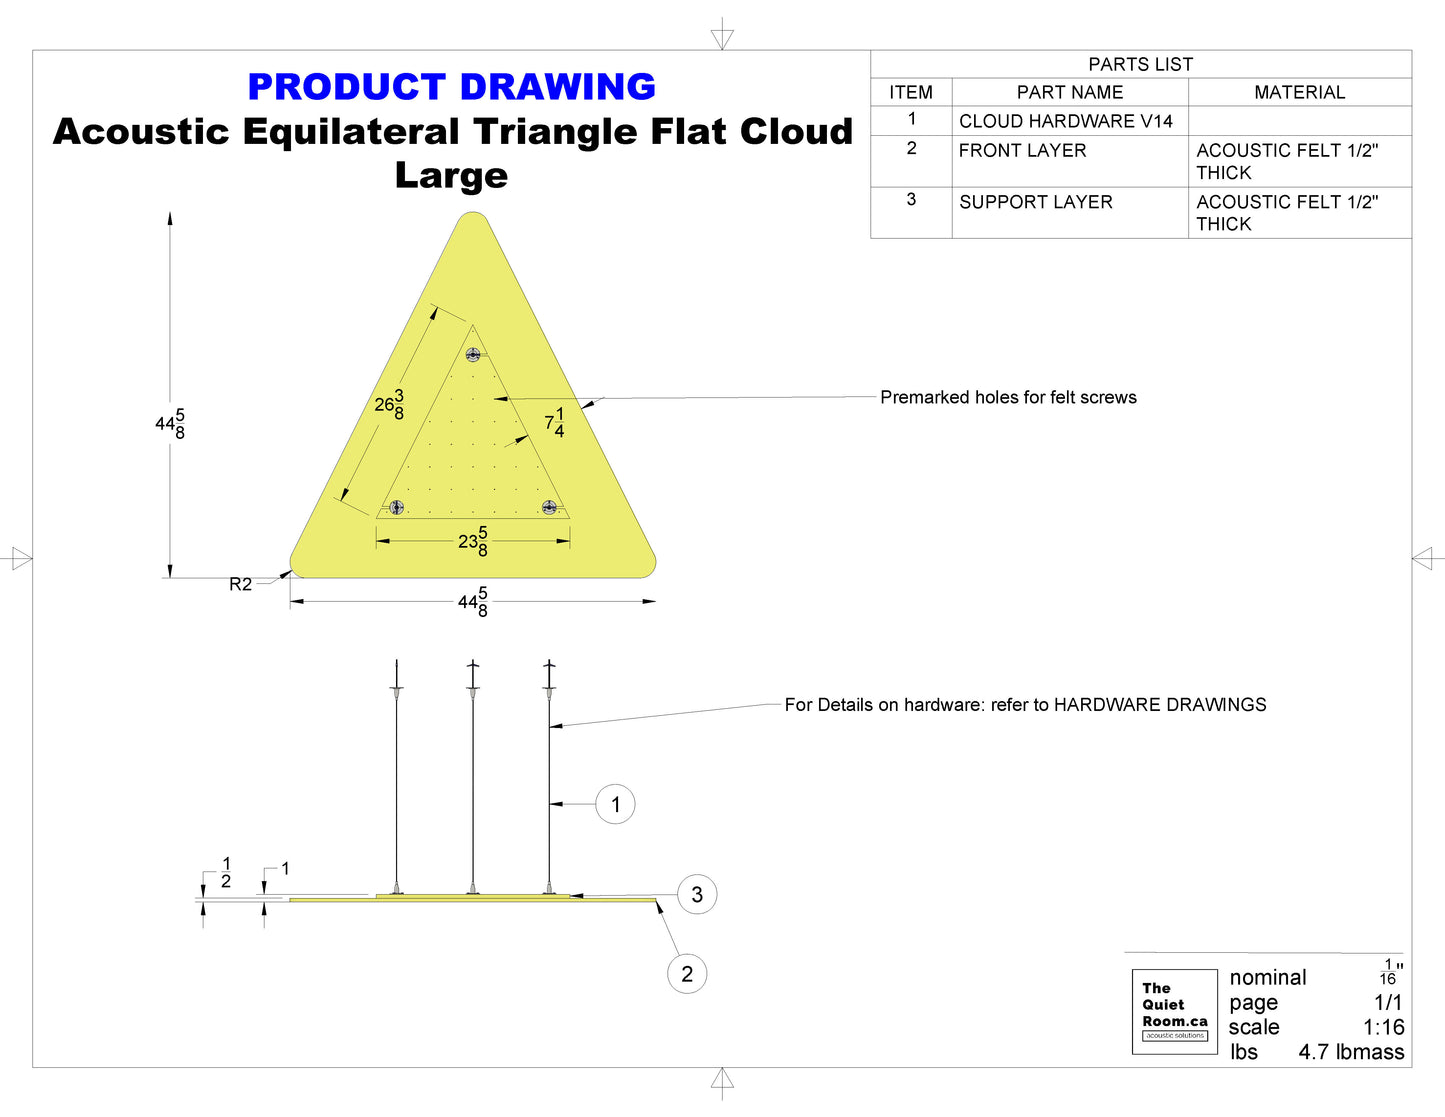 Acoustic Flat Cloud - Large Equilateral Triangle